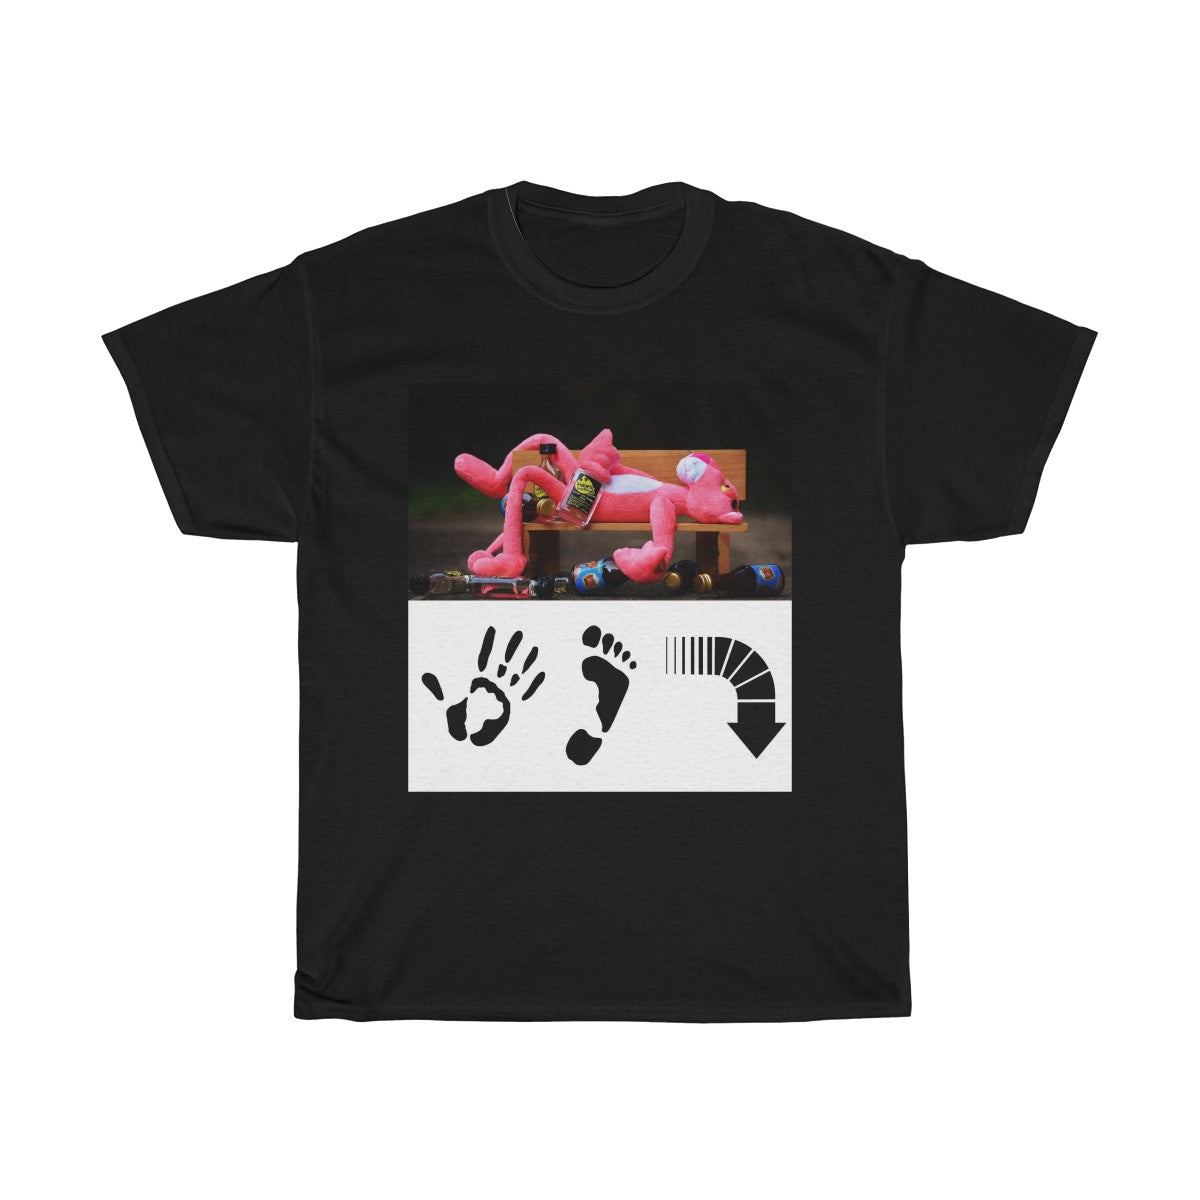 Five Toes Down 2 Bad Day Unisex Tee